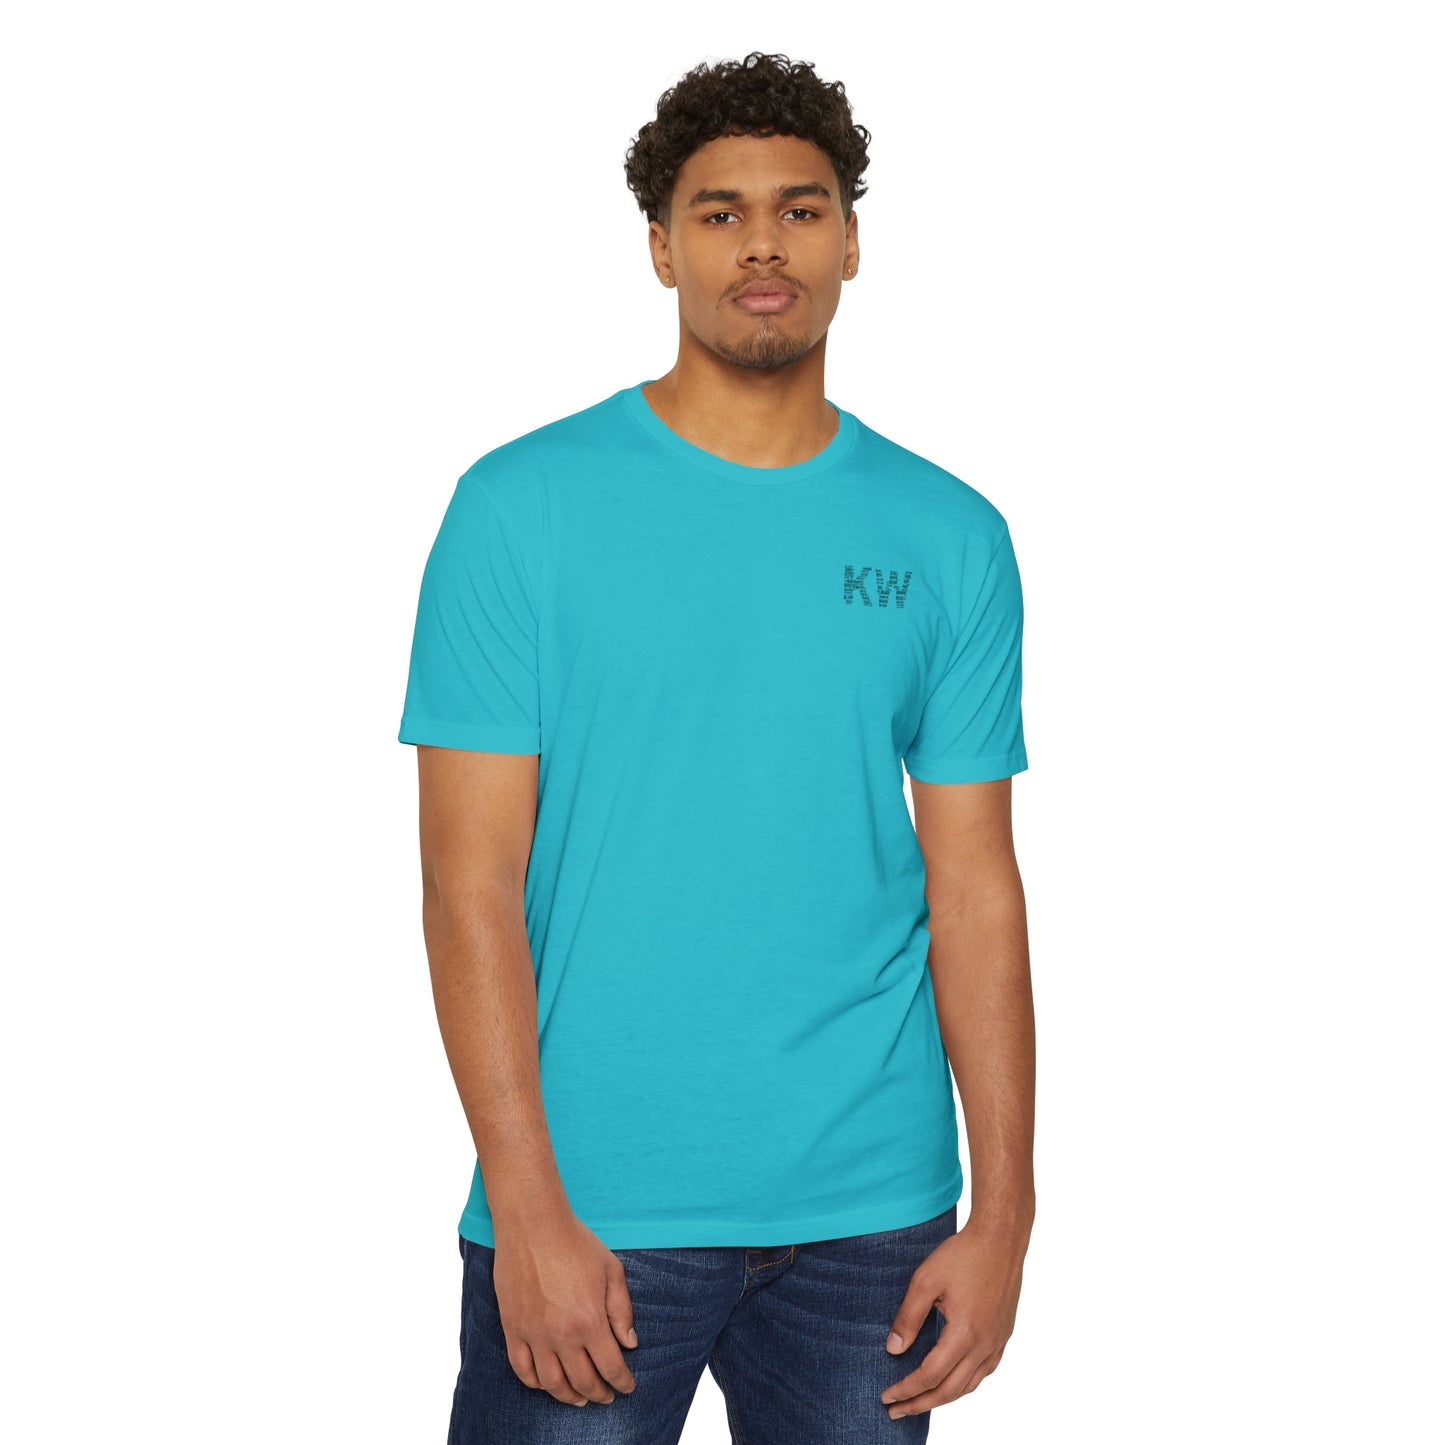 All About Key West T-shirt